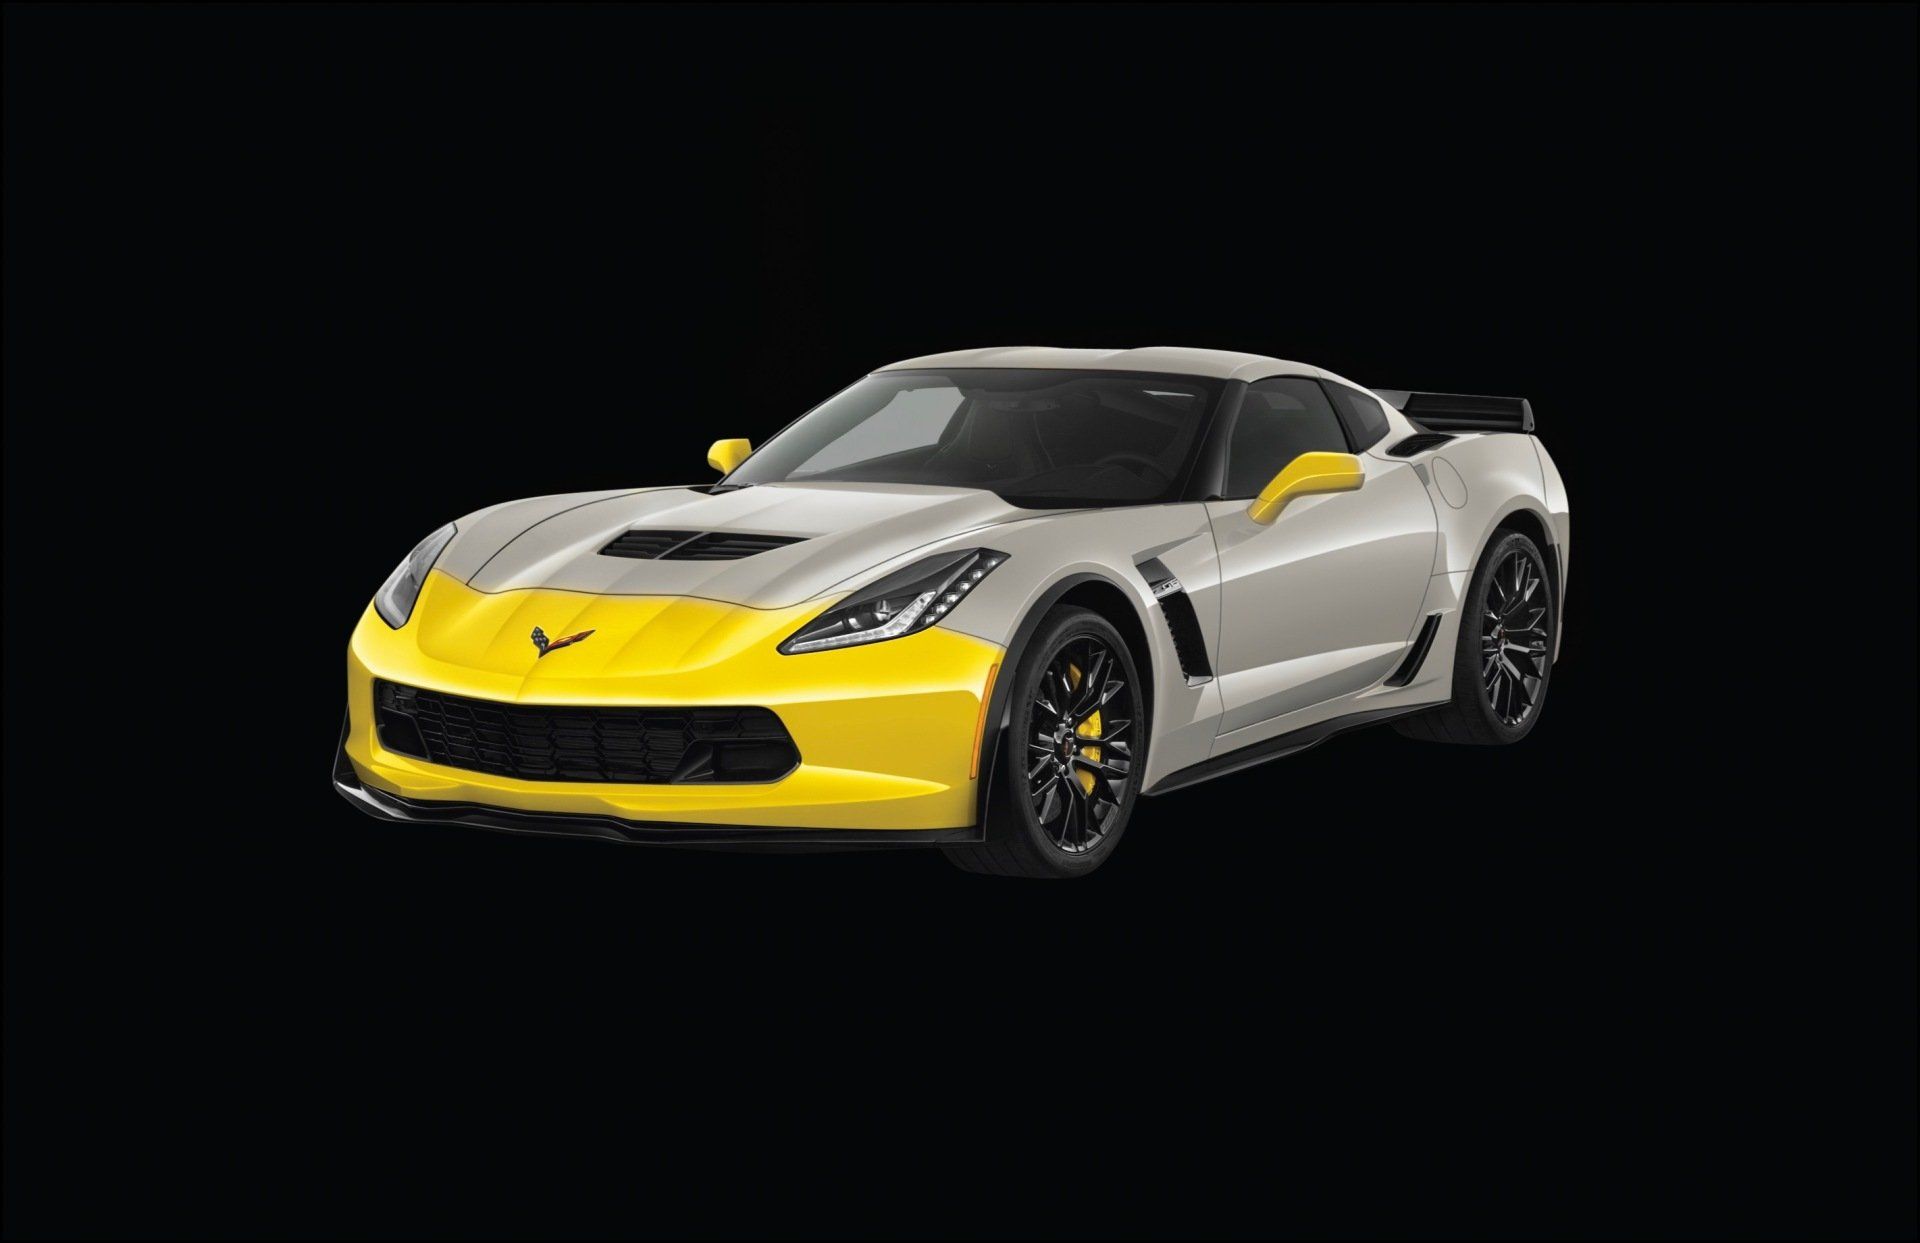 A silver and yellow sports car on a black background.